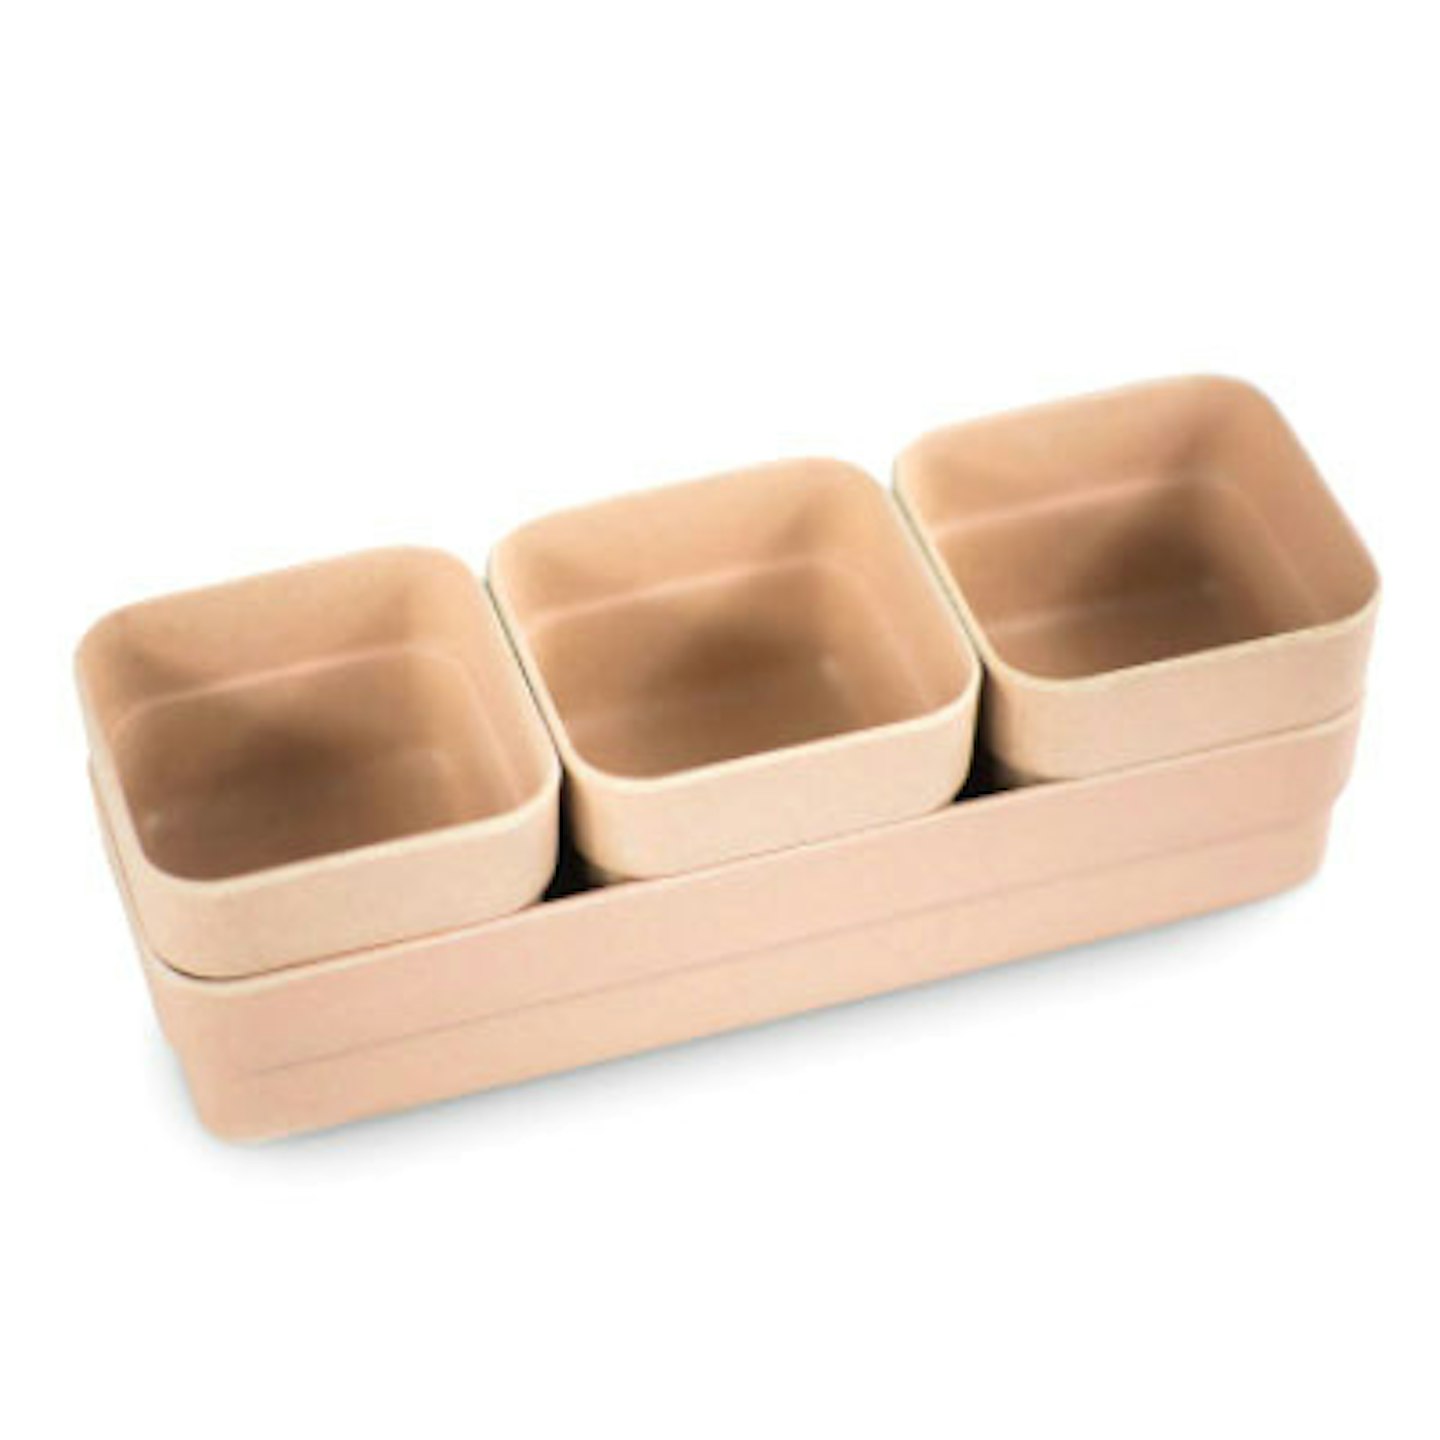 Husk Recyclable Rectangular Tray & Planters, Set of 3, Blush